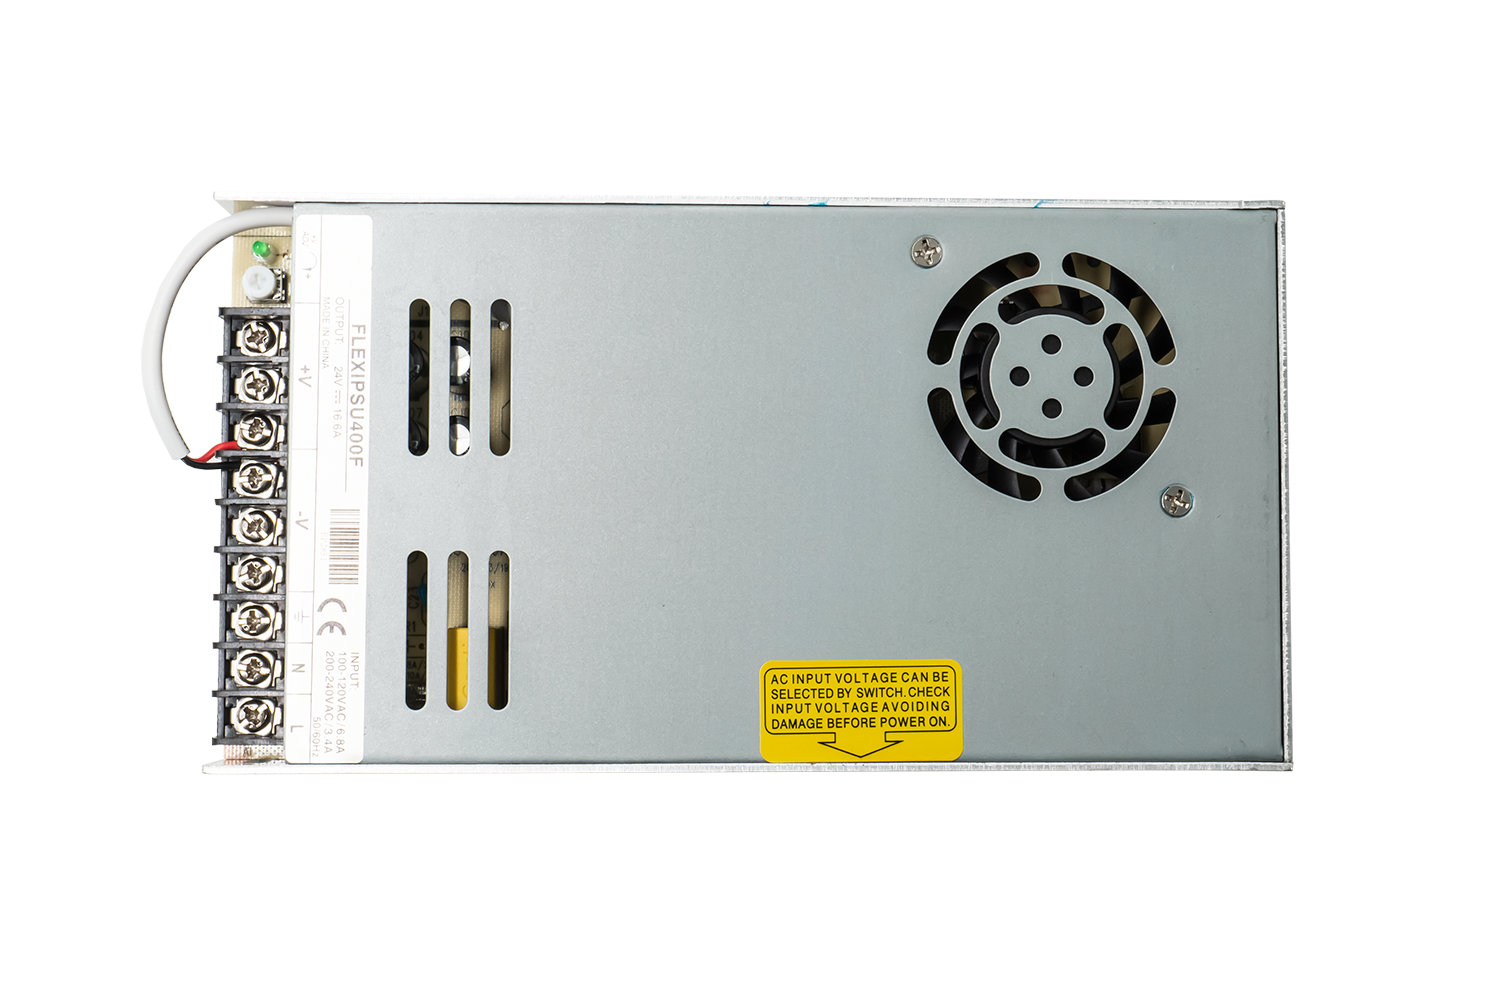 FLEXIPSU400F - power supply 400W, 24VDC output, Open frame style side view 